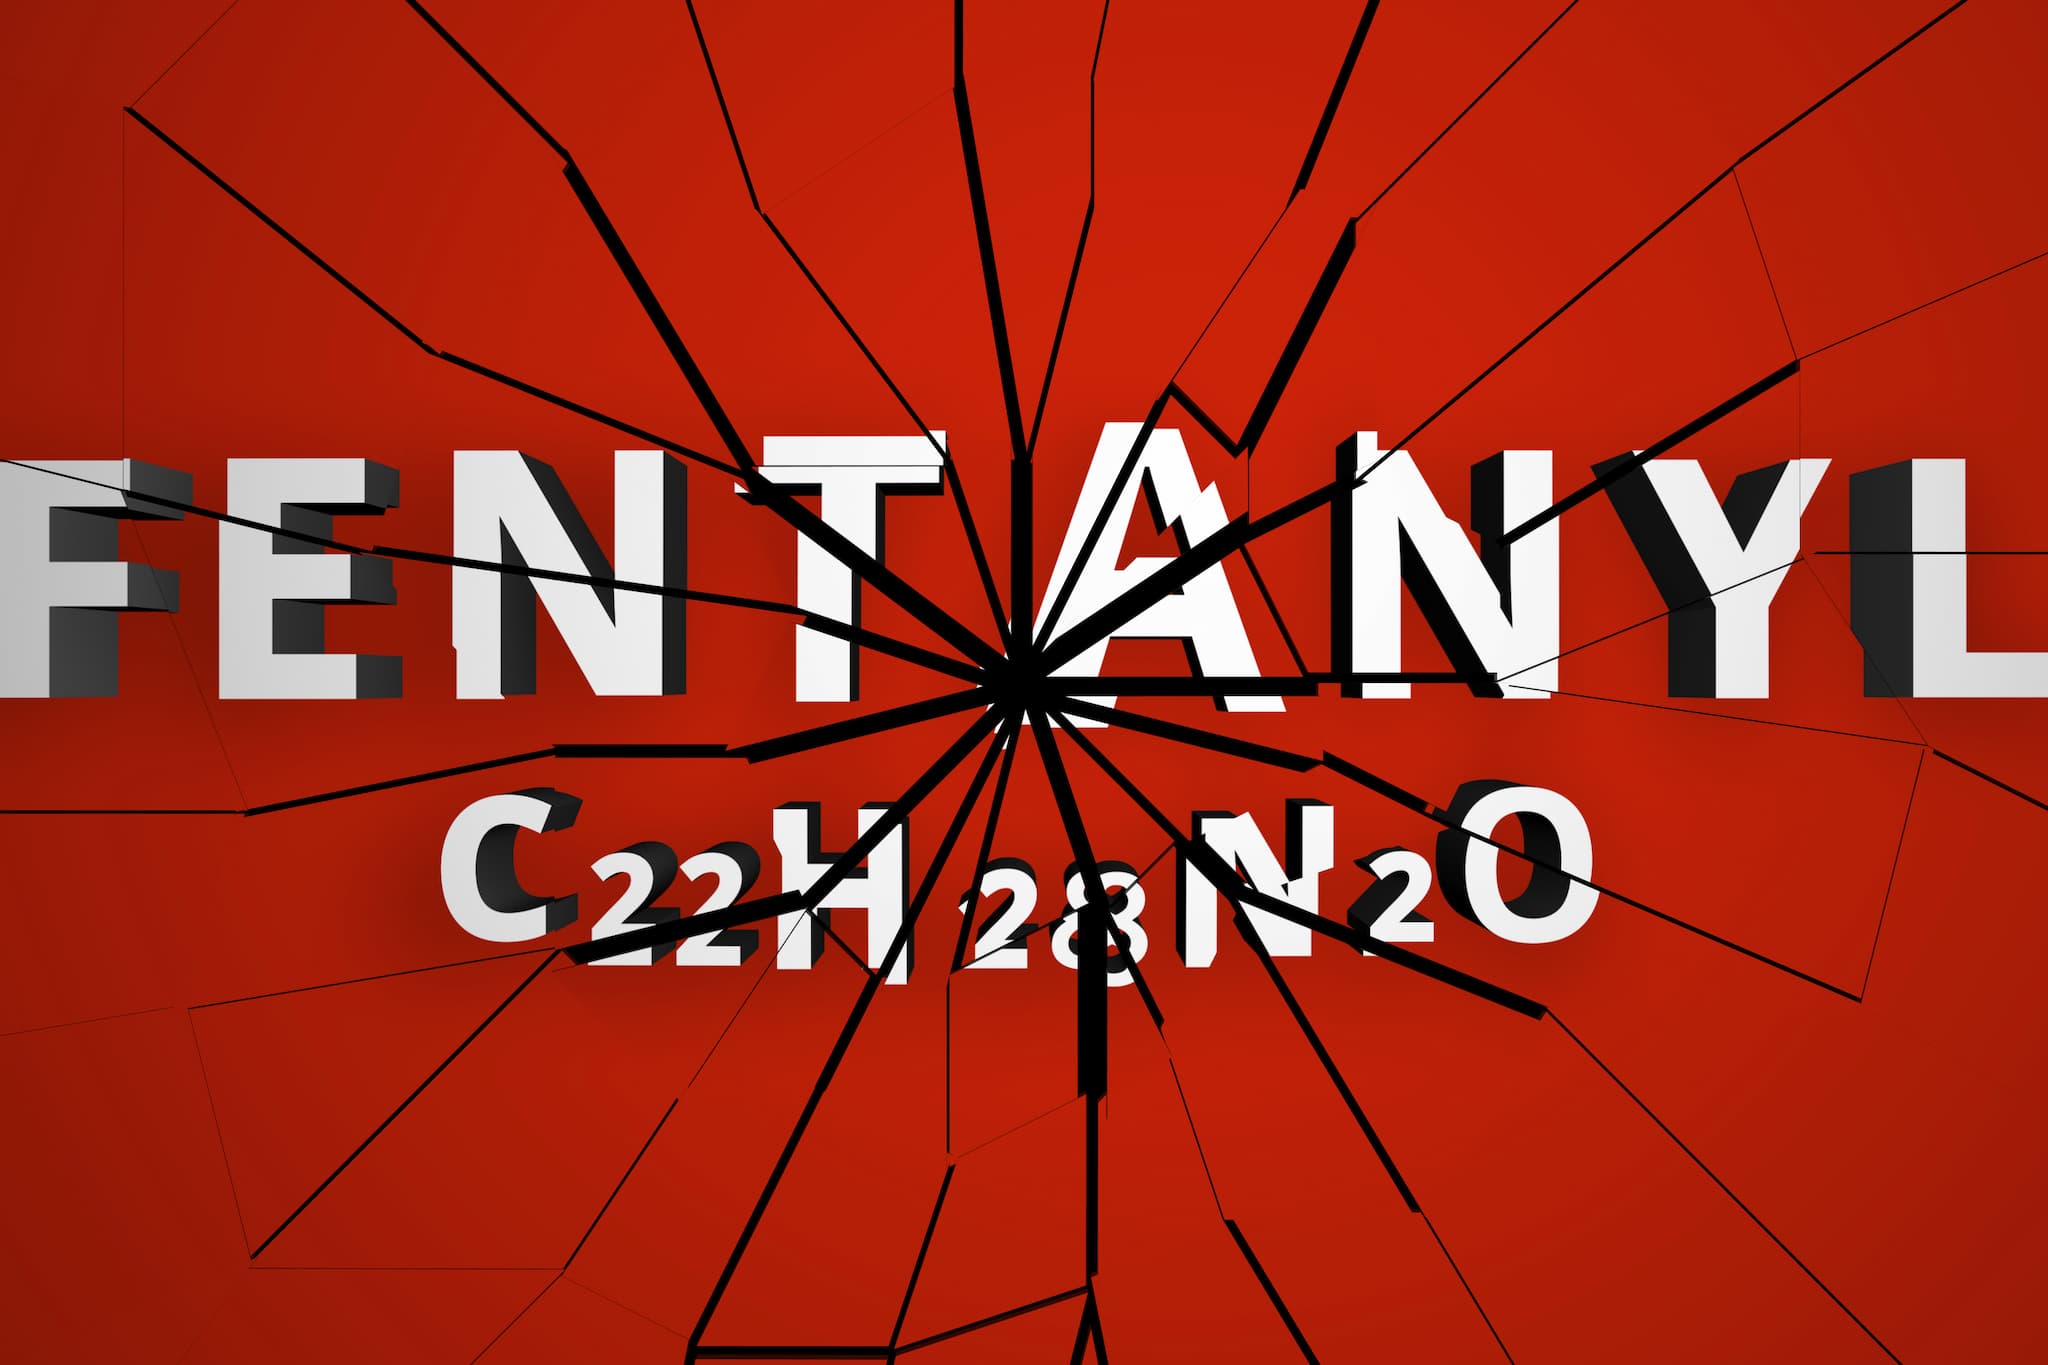 Image of the word Fentanyl with its chemical makeup as a smashed mirror